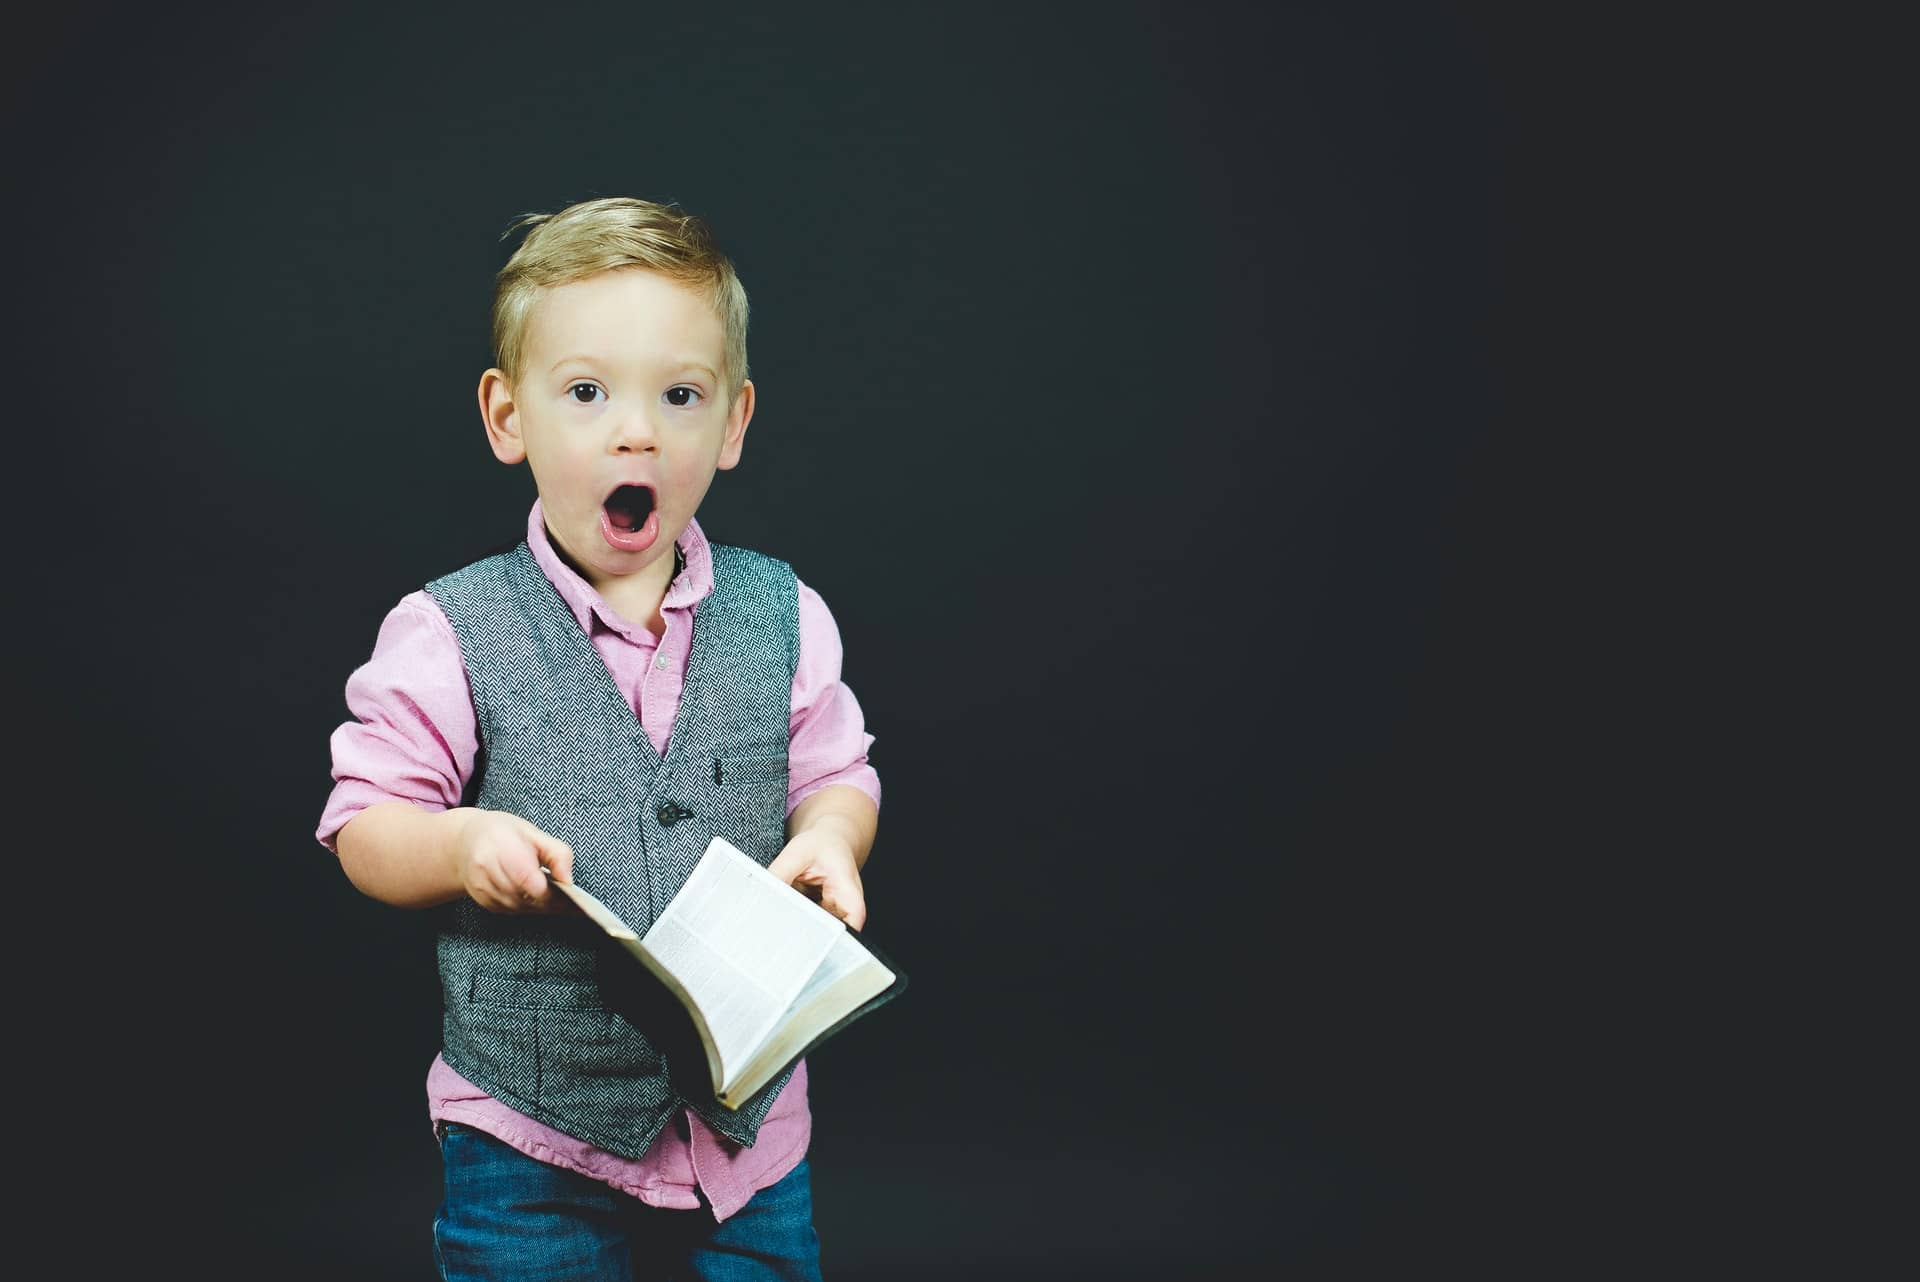 young boy with shocked expression and book in hand; SaaS Marketing Books concept